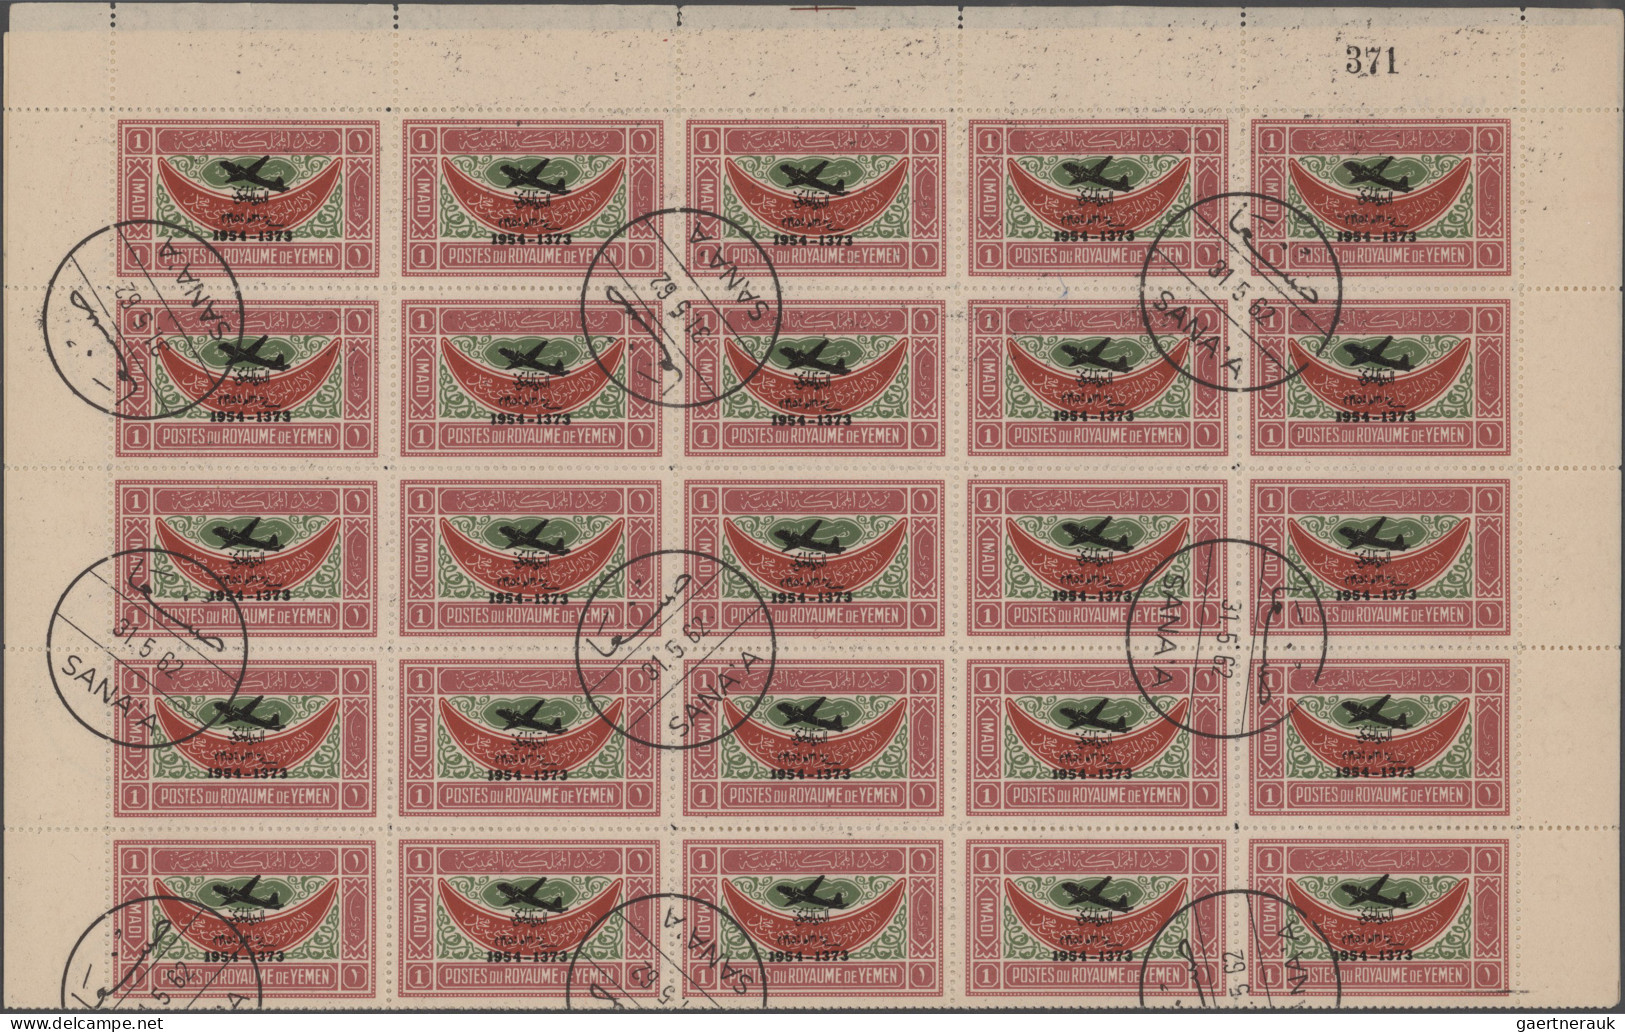 Yemen: 1954, Provisionals, stock of the overprint "airplane, year dates and curr